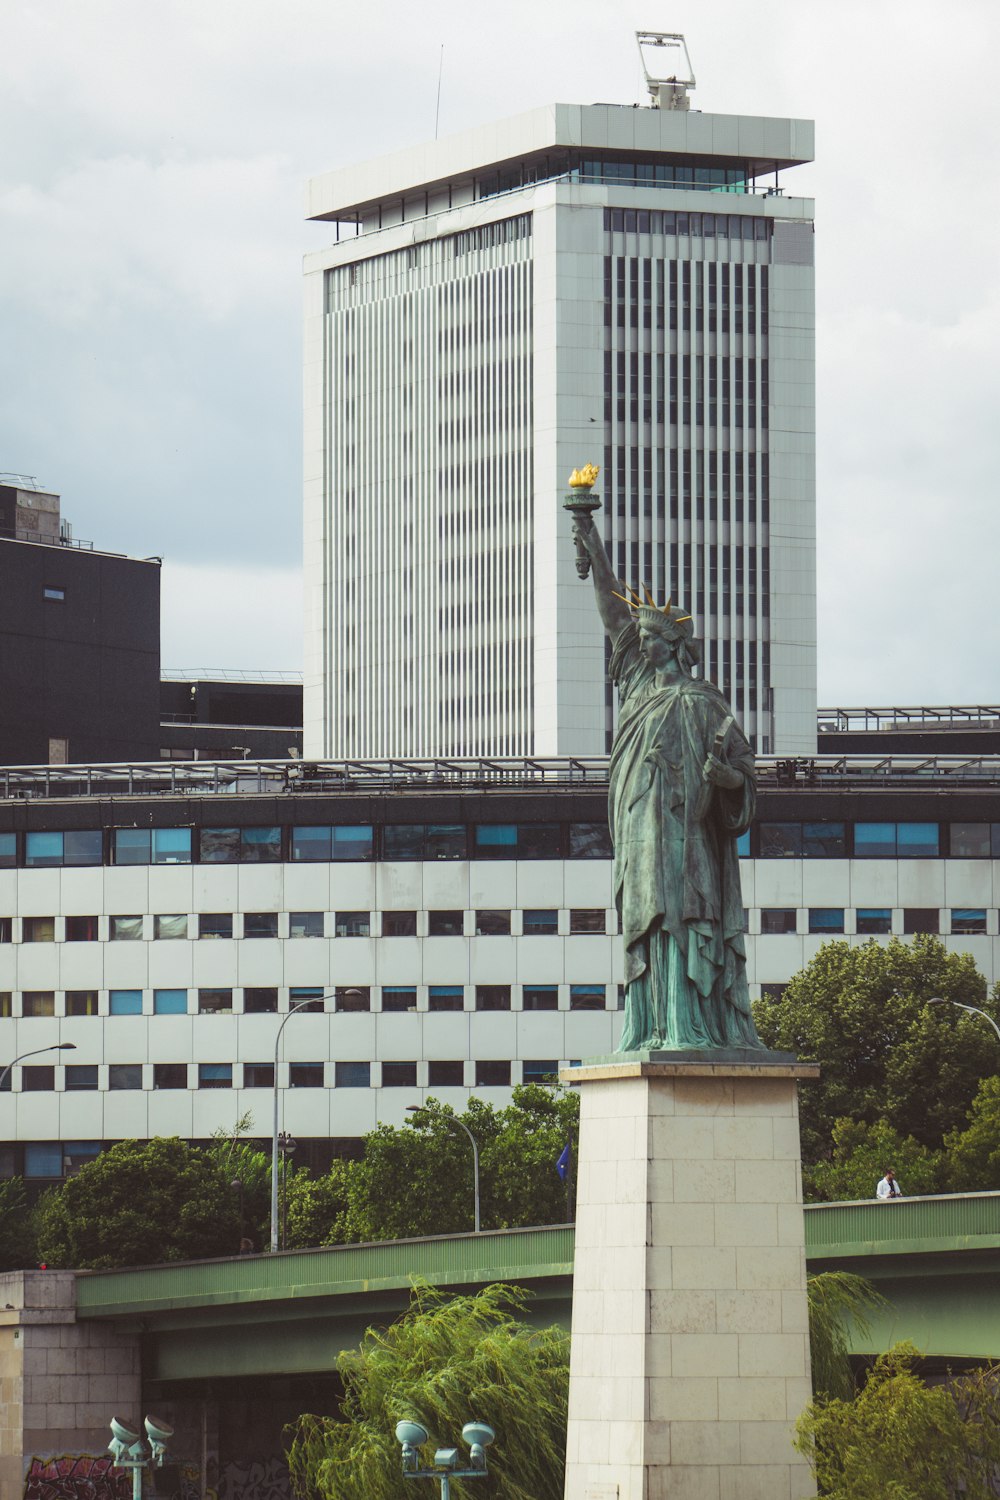 a statue of a person holding a torch in front of a building